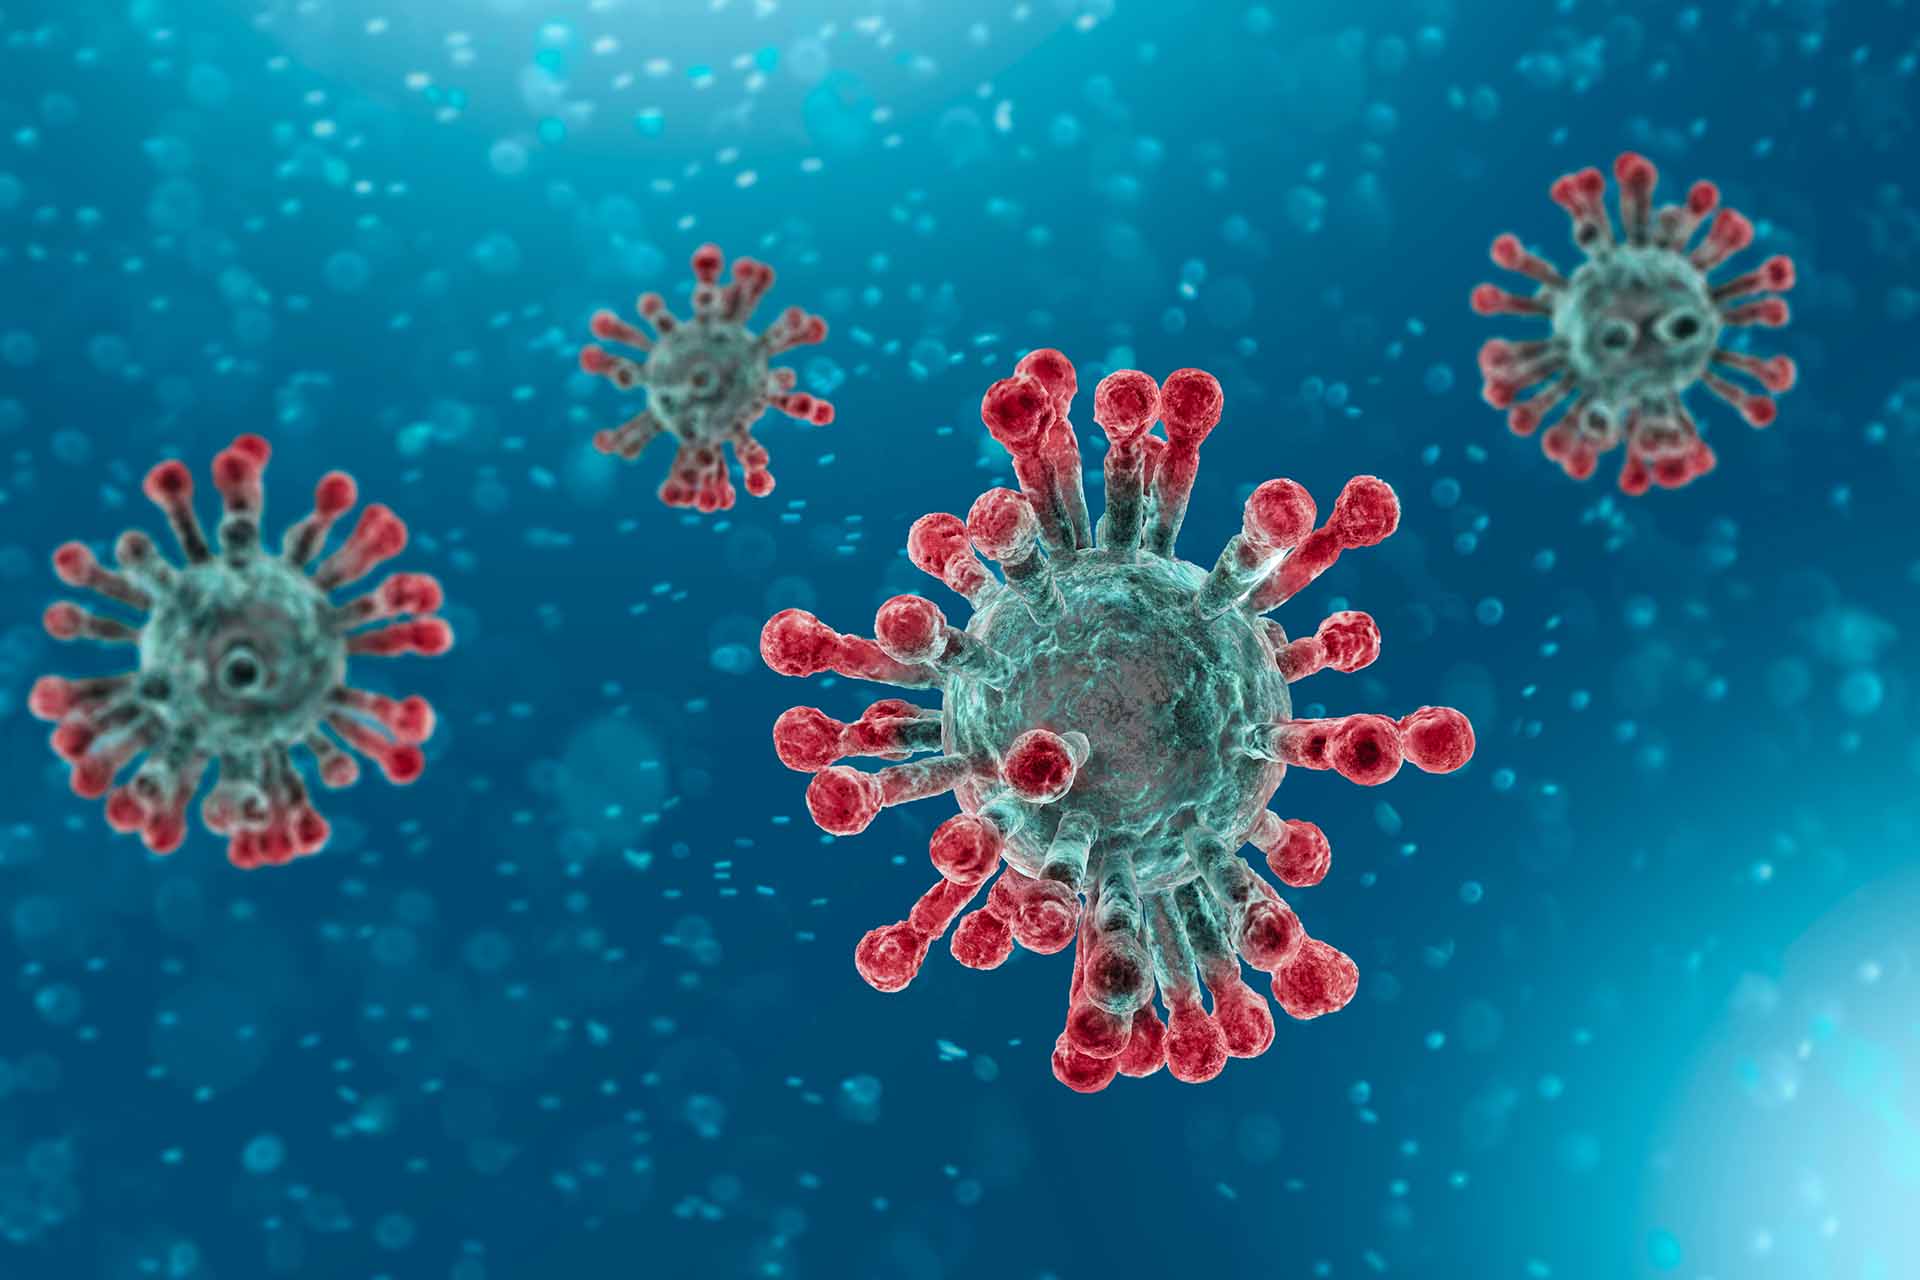 How should Investors and Traders deal with Coronavirus Crisis